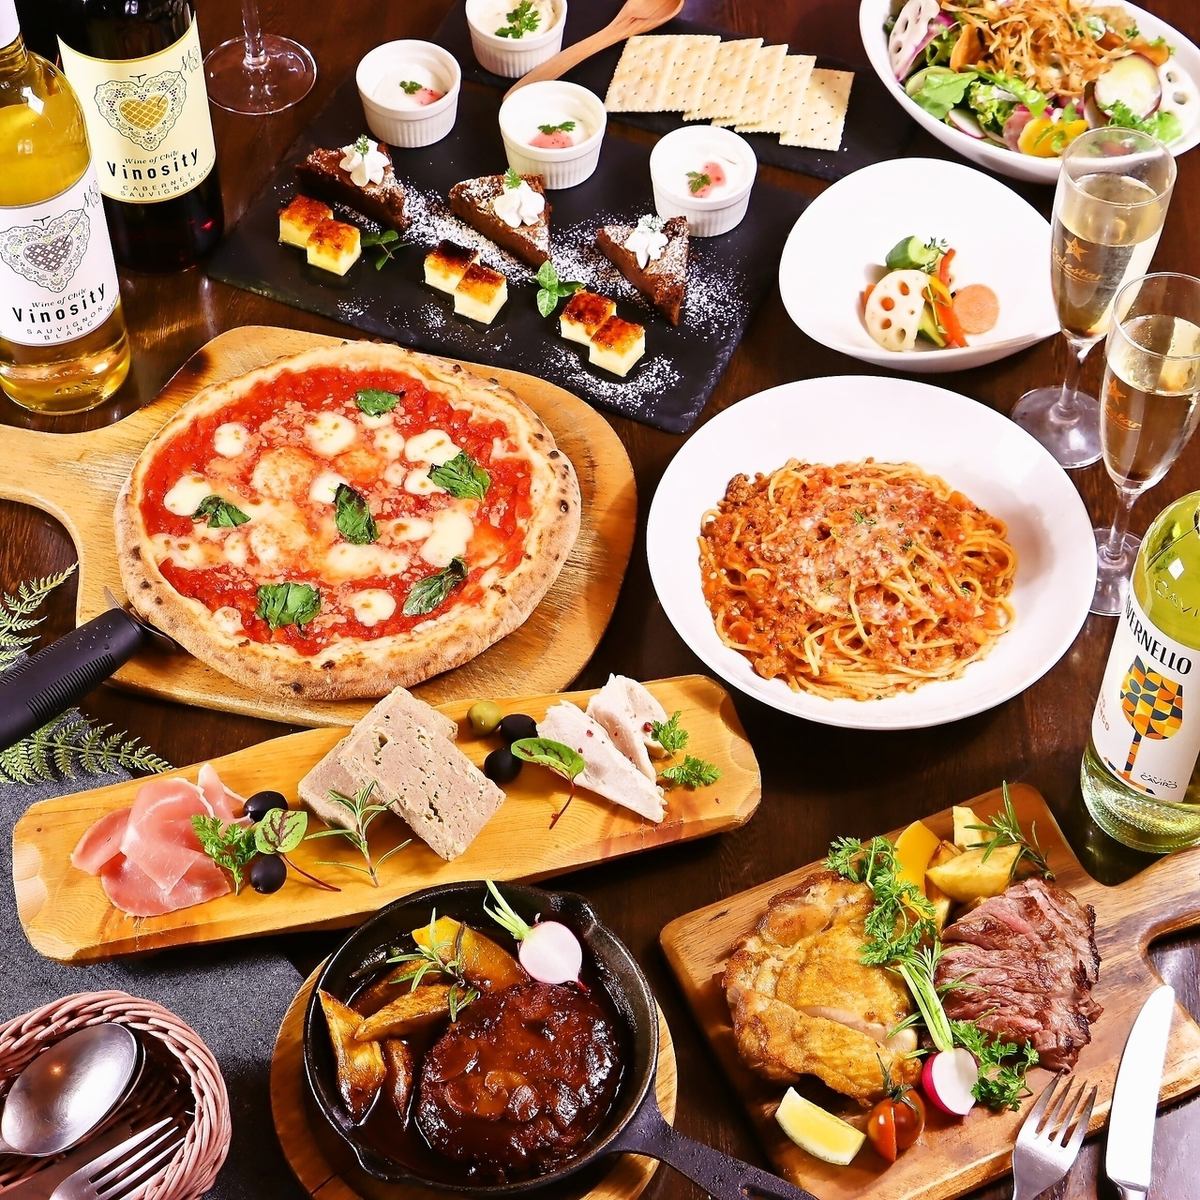 All-you-can-eat authentic Italian and French cuisine! Available from 3,700 yen!